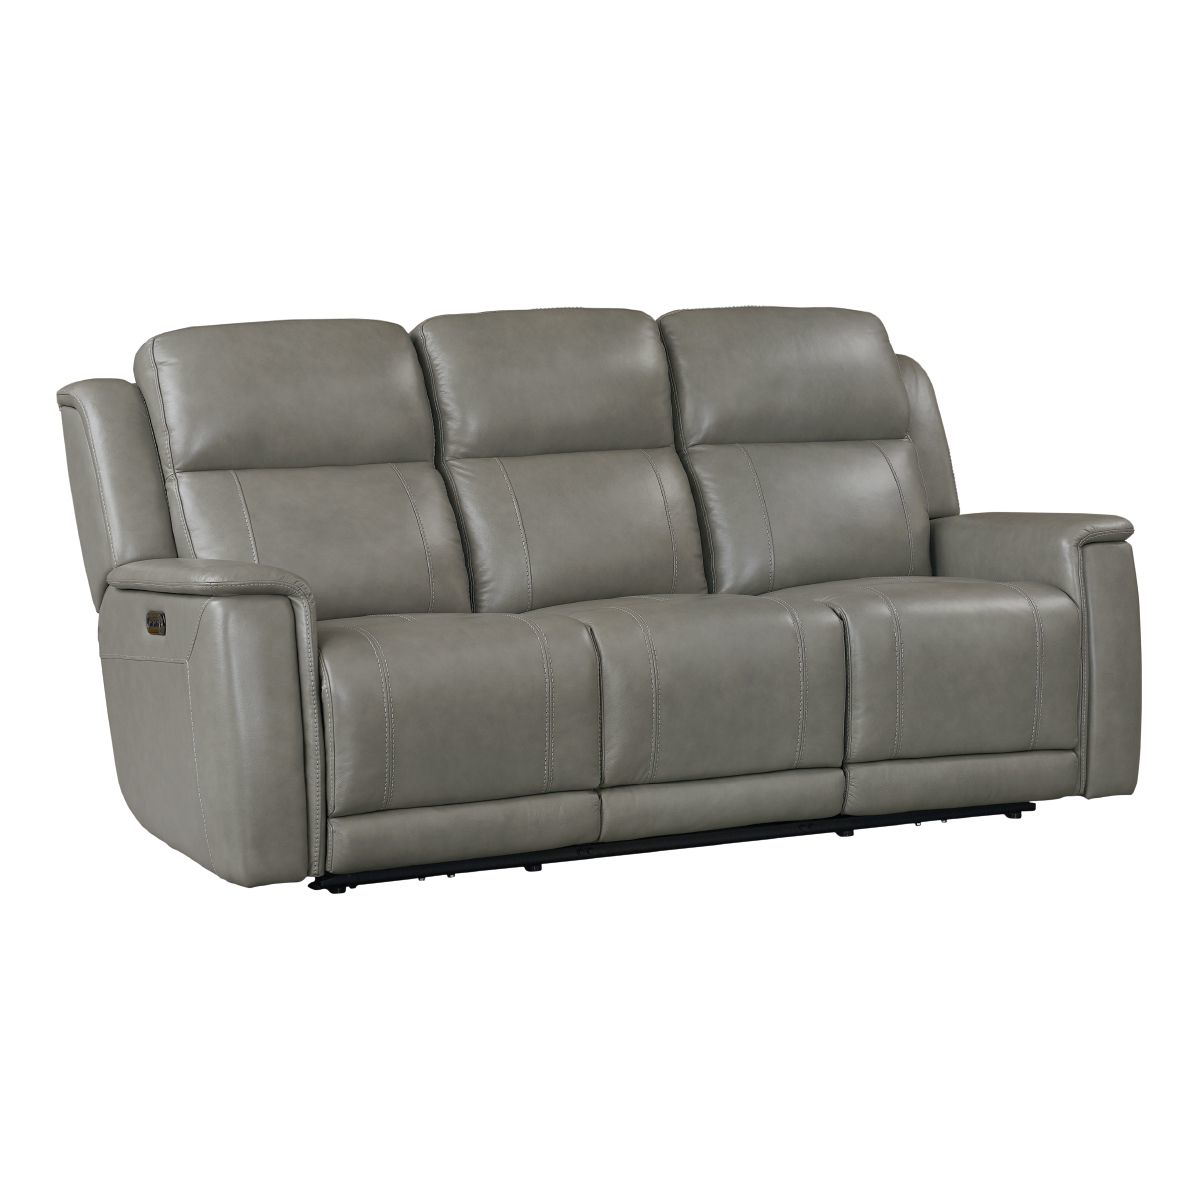 Picture of CONOVER GRY SOFA W/PHR/LUM